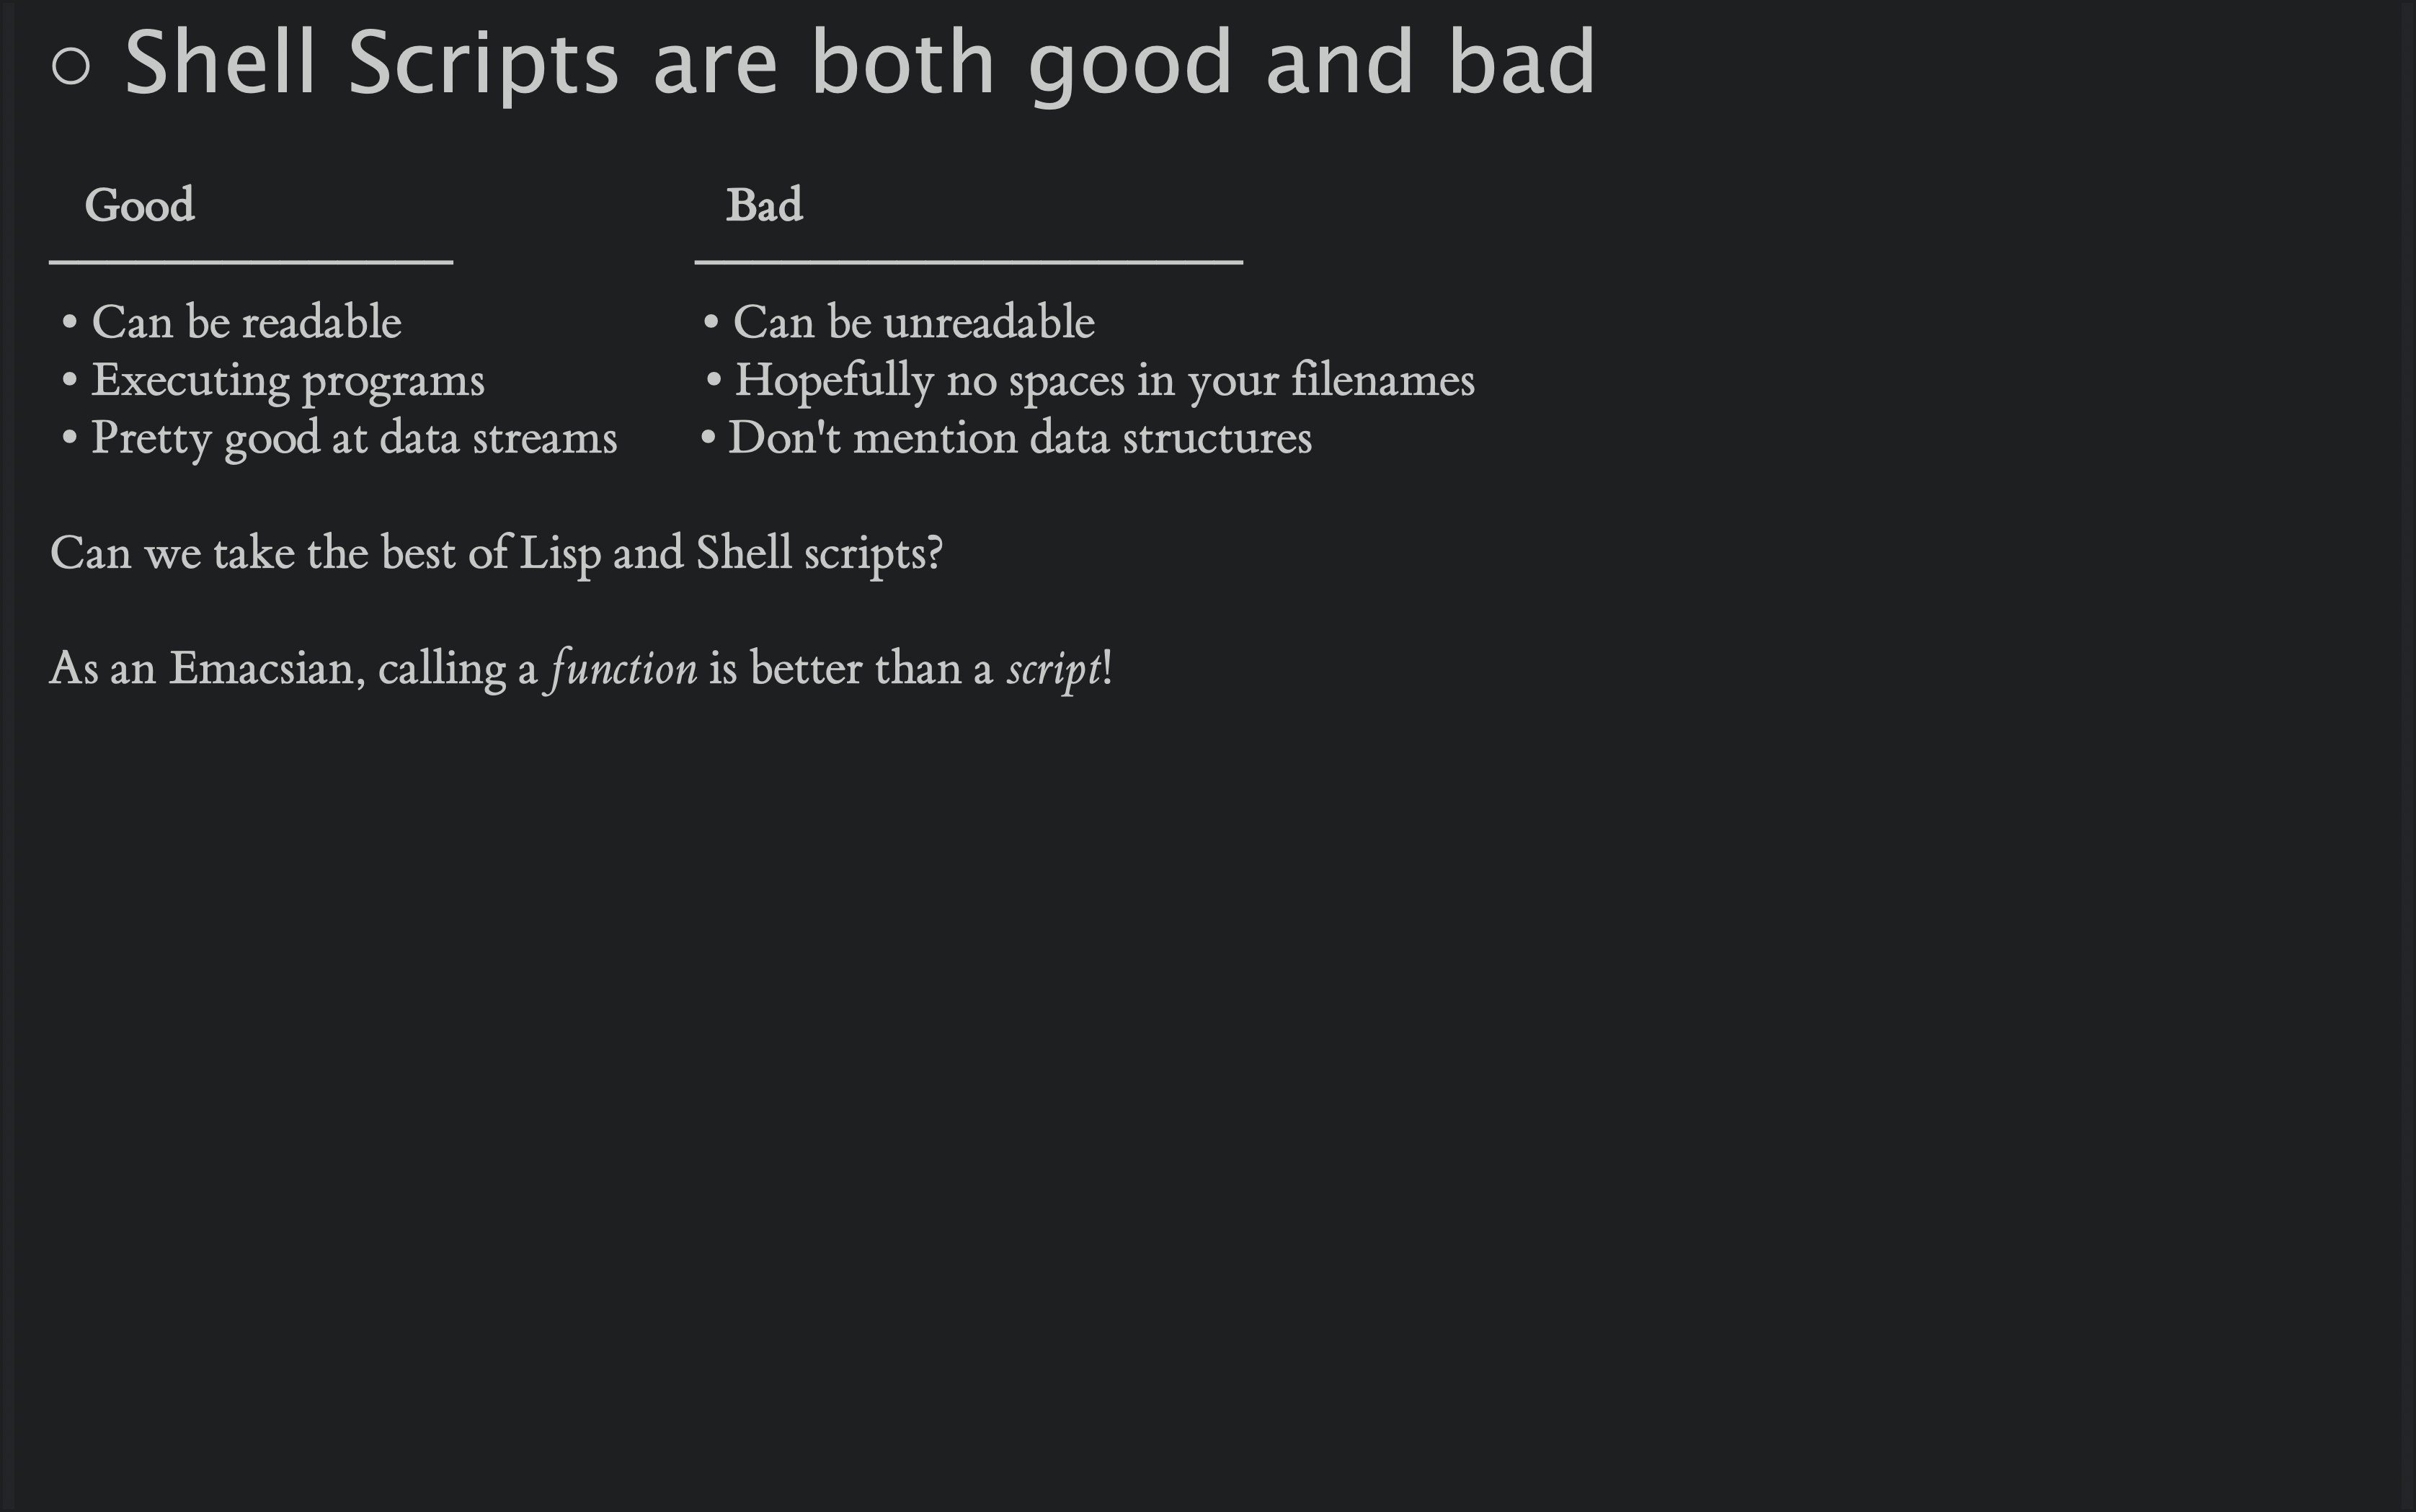 Shell scripts are both good and bad